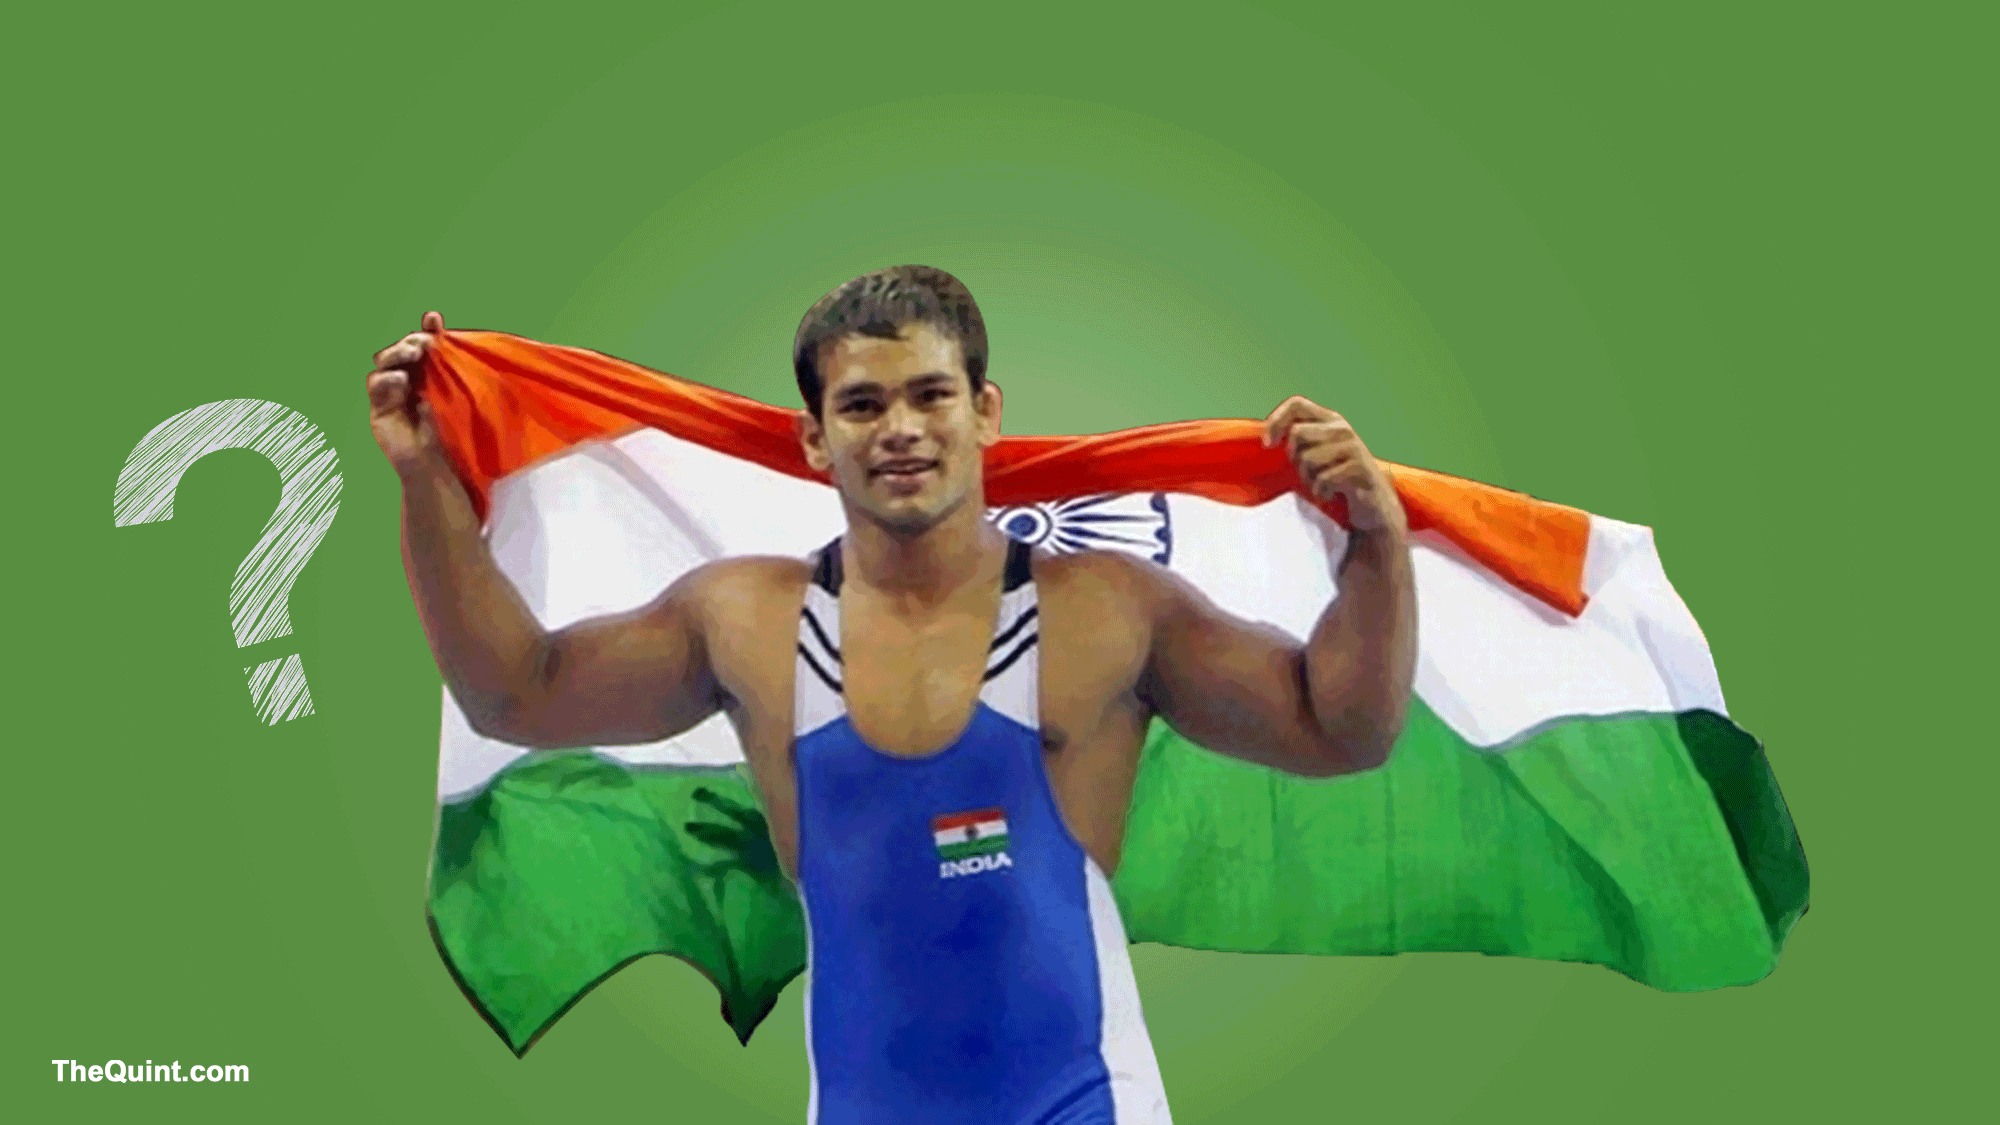 Narsingh Yadav’s Olympic berth is in doubt after he tested positive in a dope test. (Photo: <b>The Quint</b>)